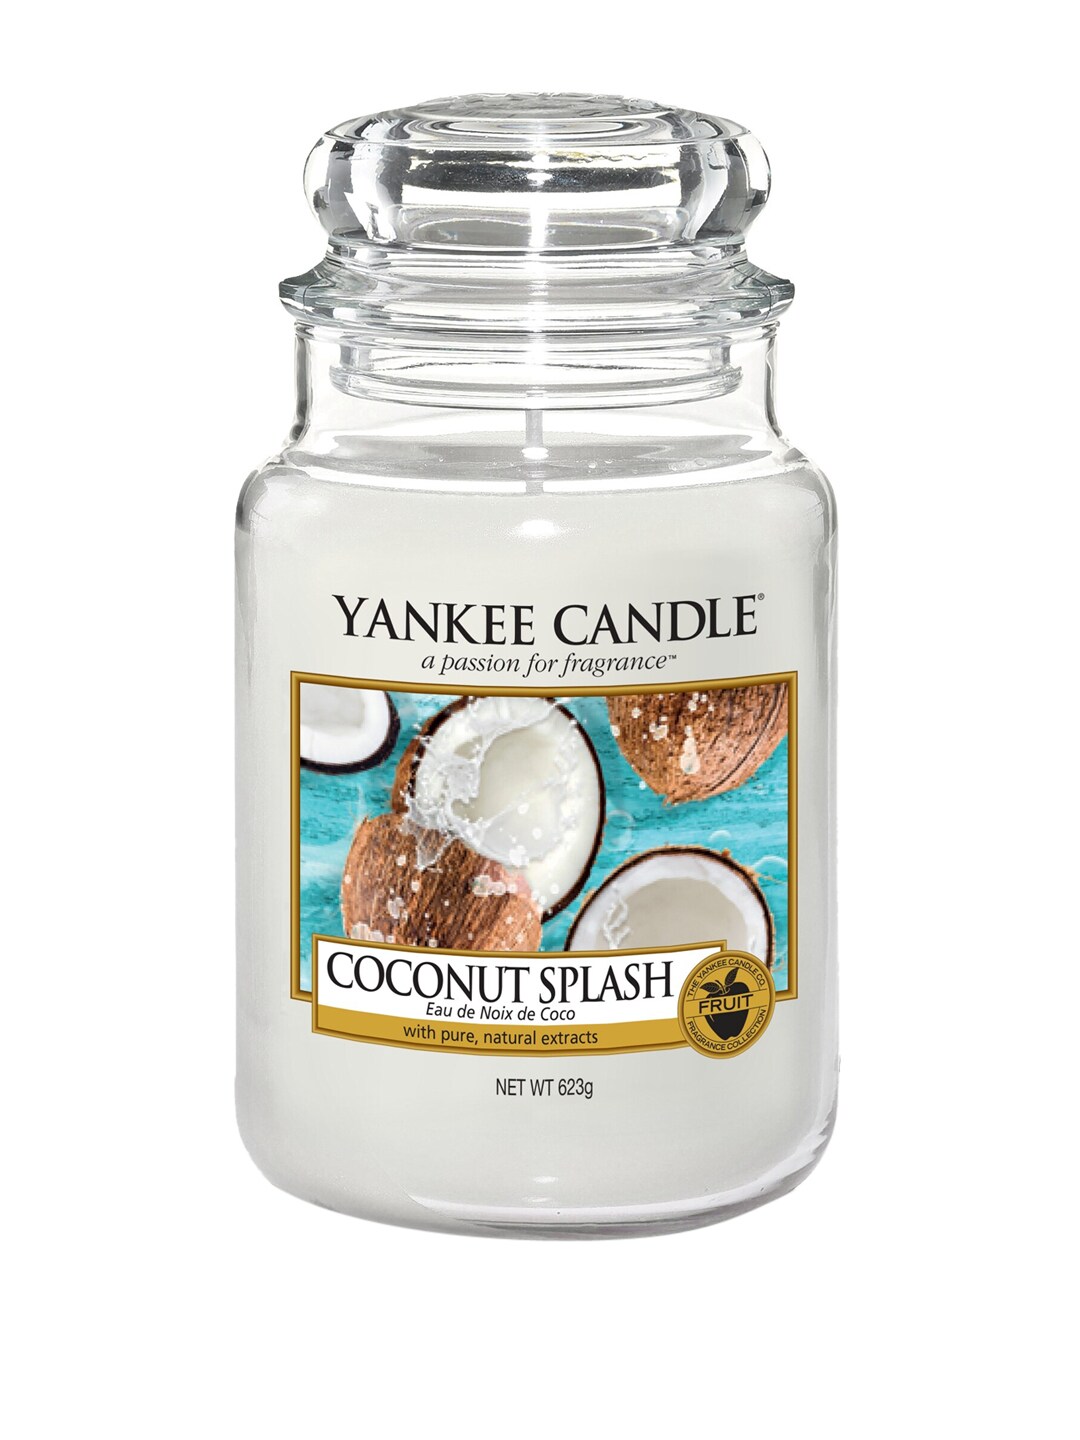 YANKEE CANDLE White Classic Large Jar Coconut Splash Scented Candle Price in India